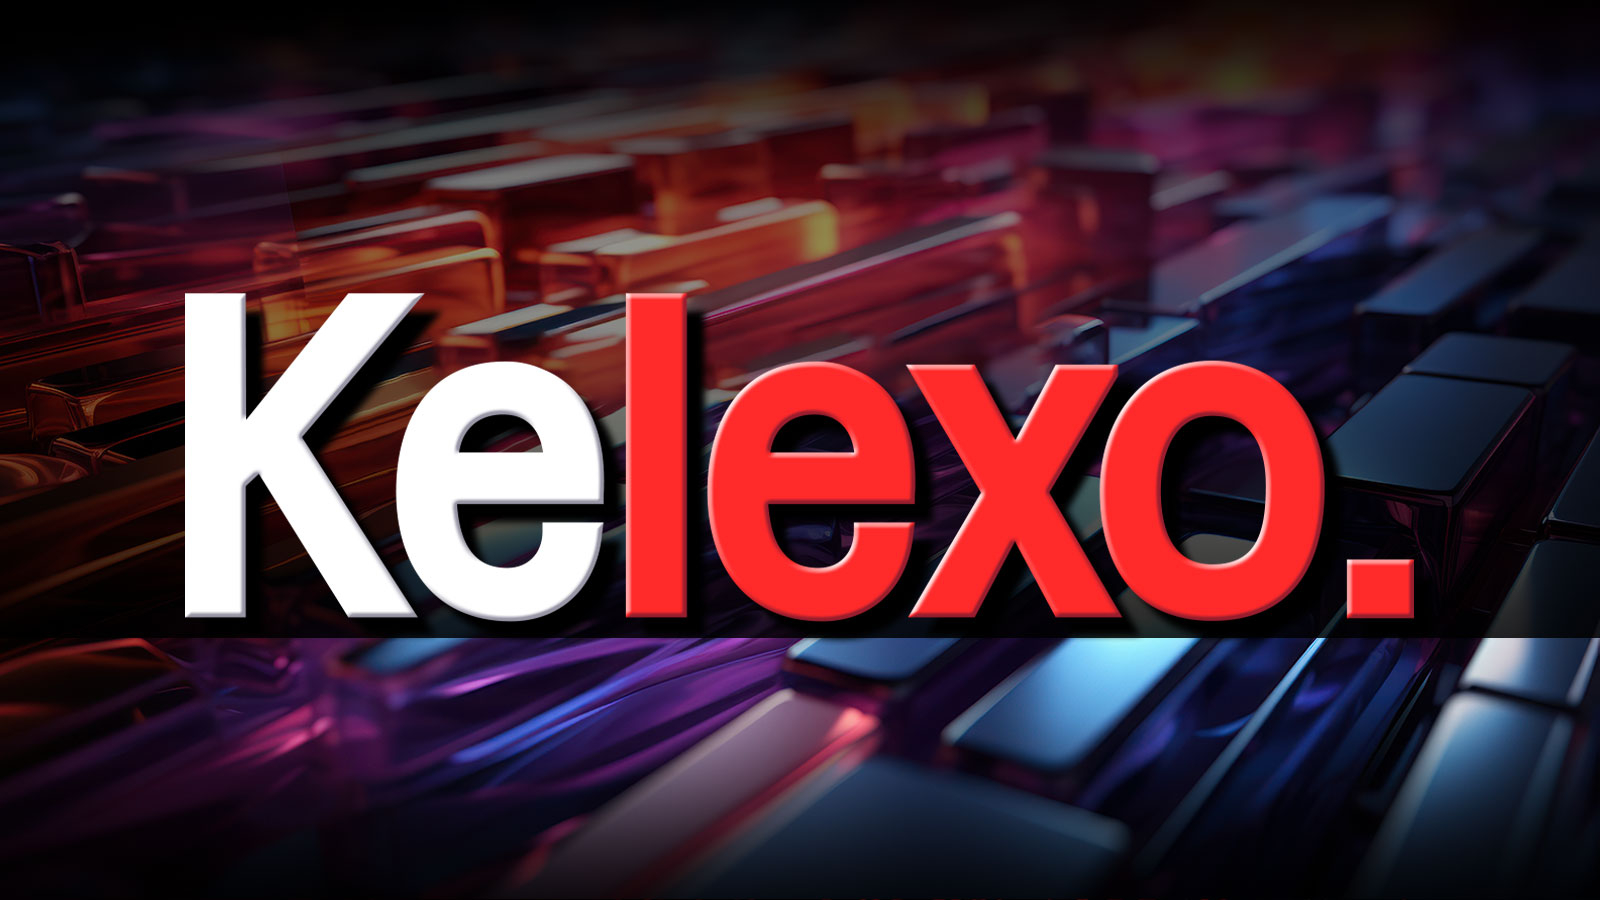 Kelexo (KLXO) Draws Attention to Presale, As Solana (SOL) Holds Gains, and Binance Coin (BNB) Make Market Return